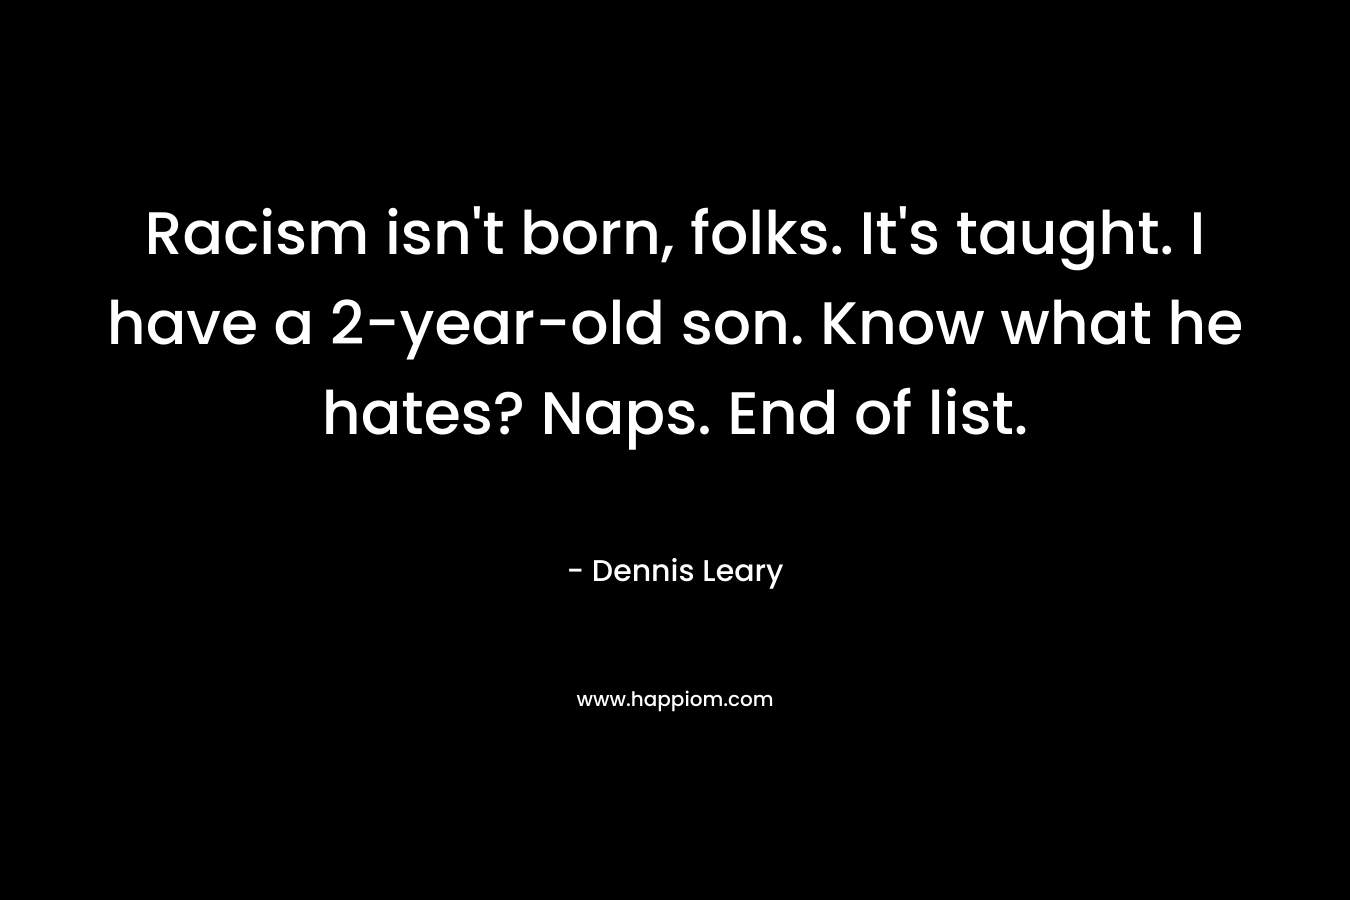 Racism isn’t born, folks. It’s taught. I have a 2-year-old son. Know what he hates? Naps. End of list. – Dennis Leary